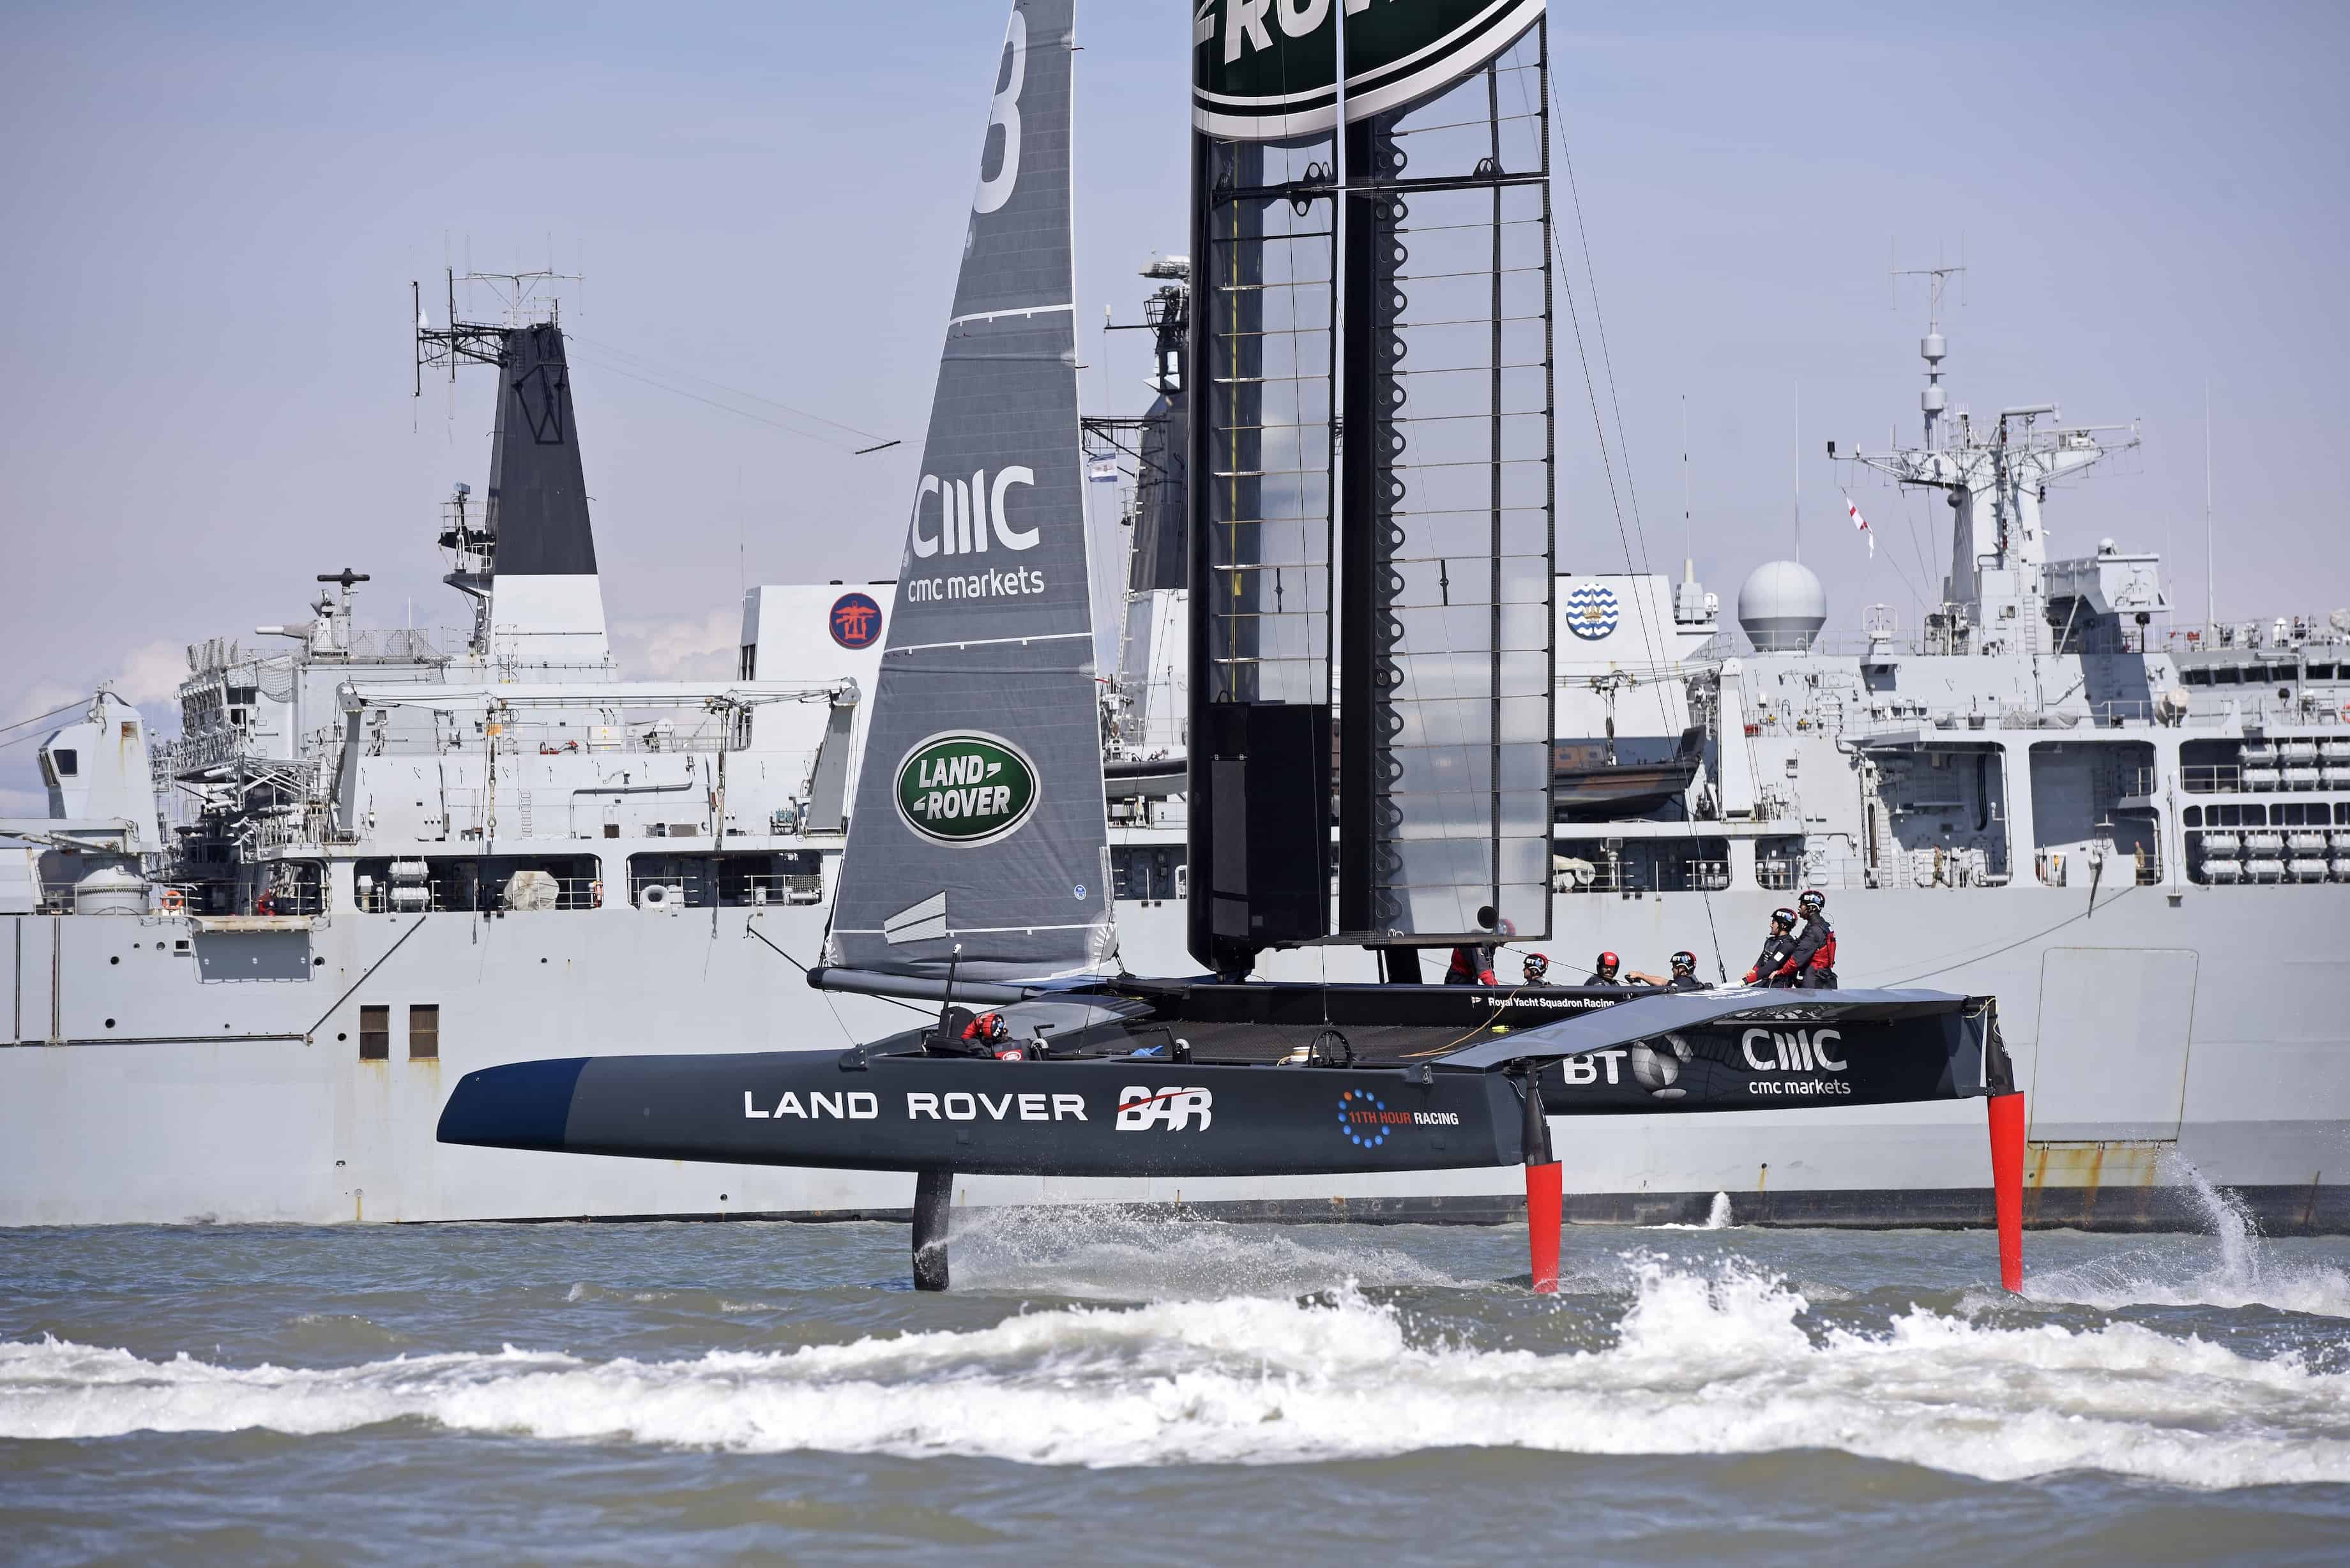 The newest high-tech America's Cup flying yachts